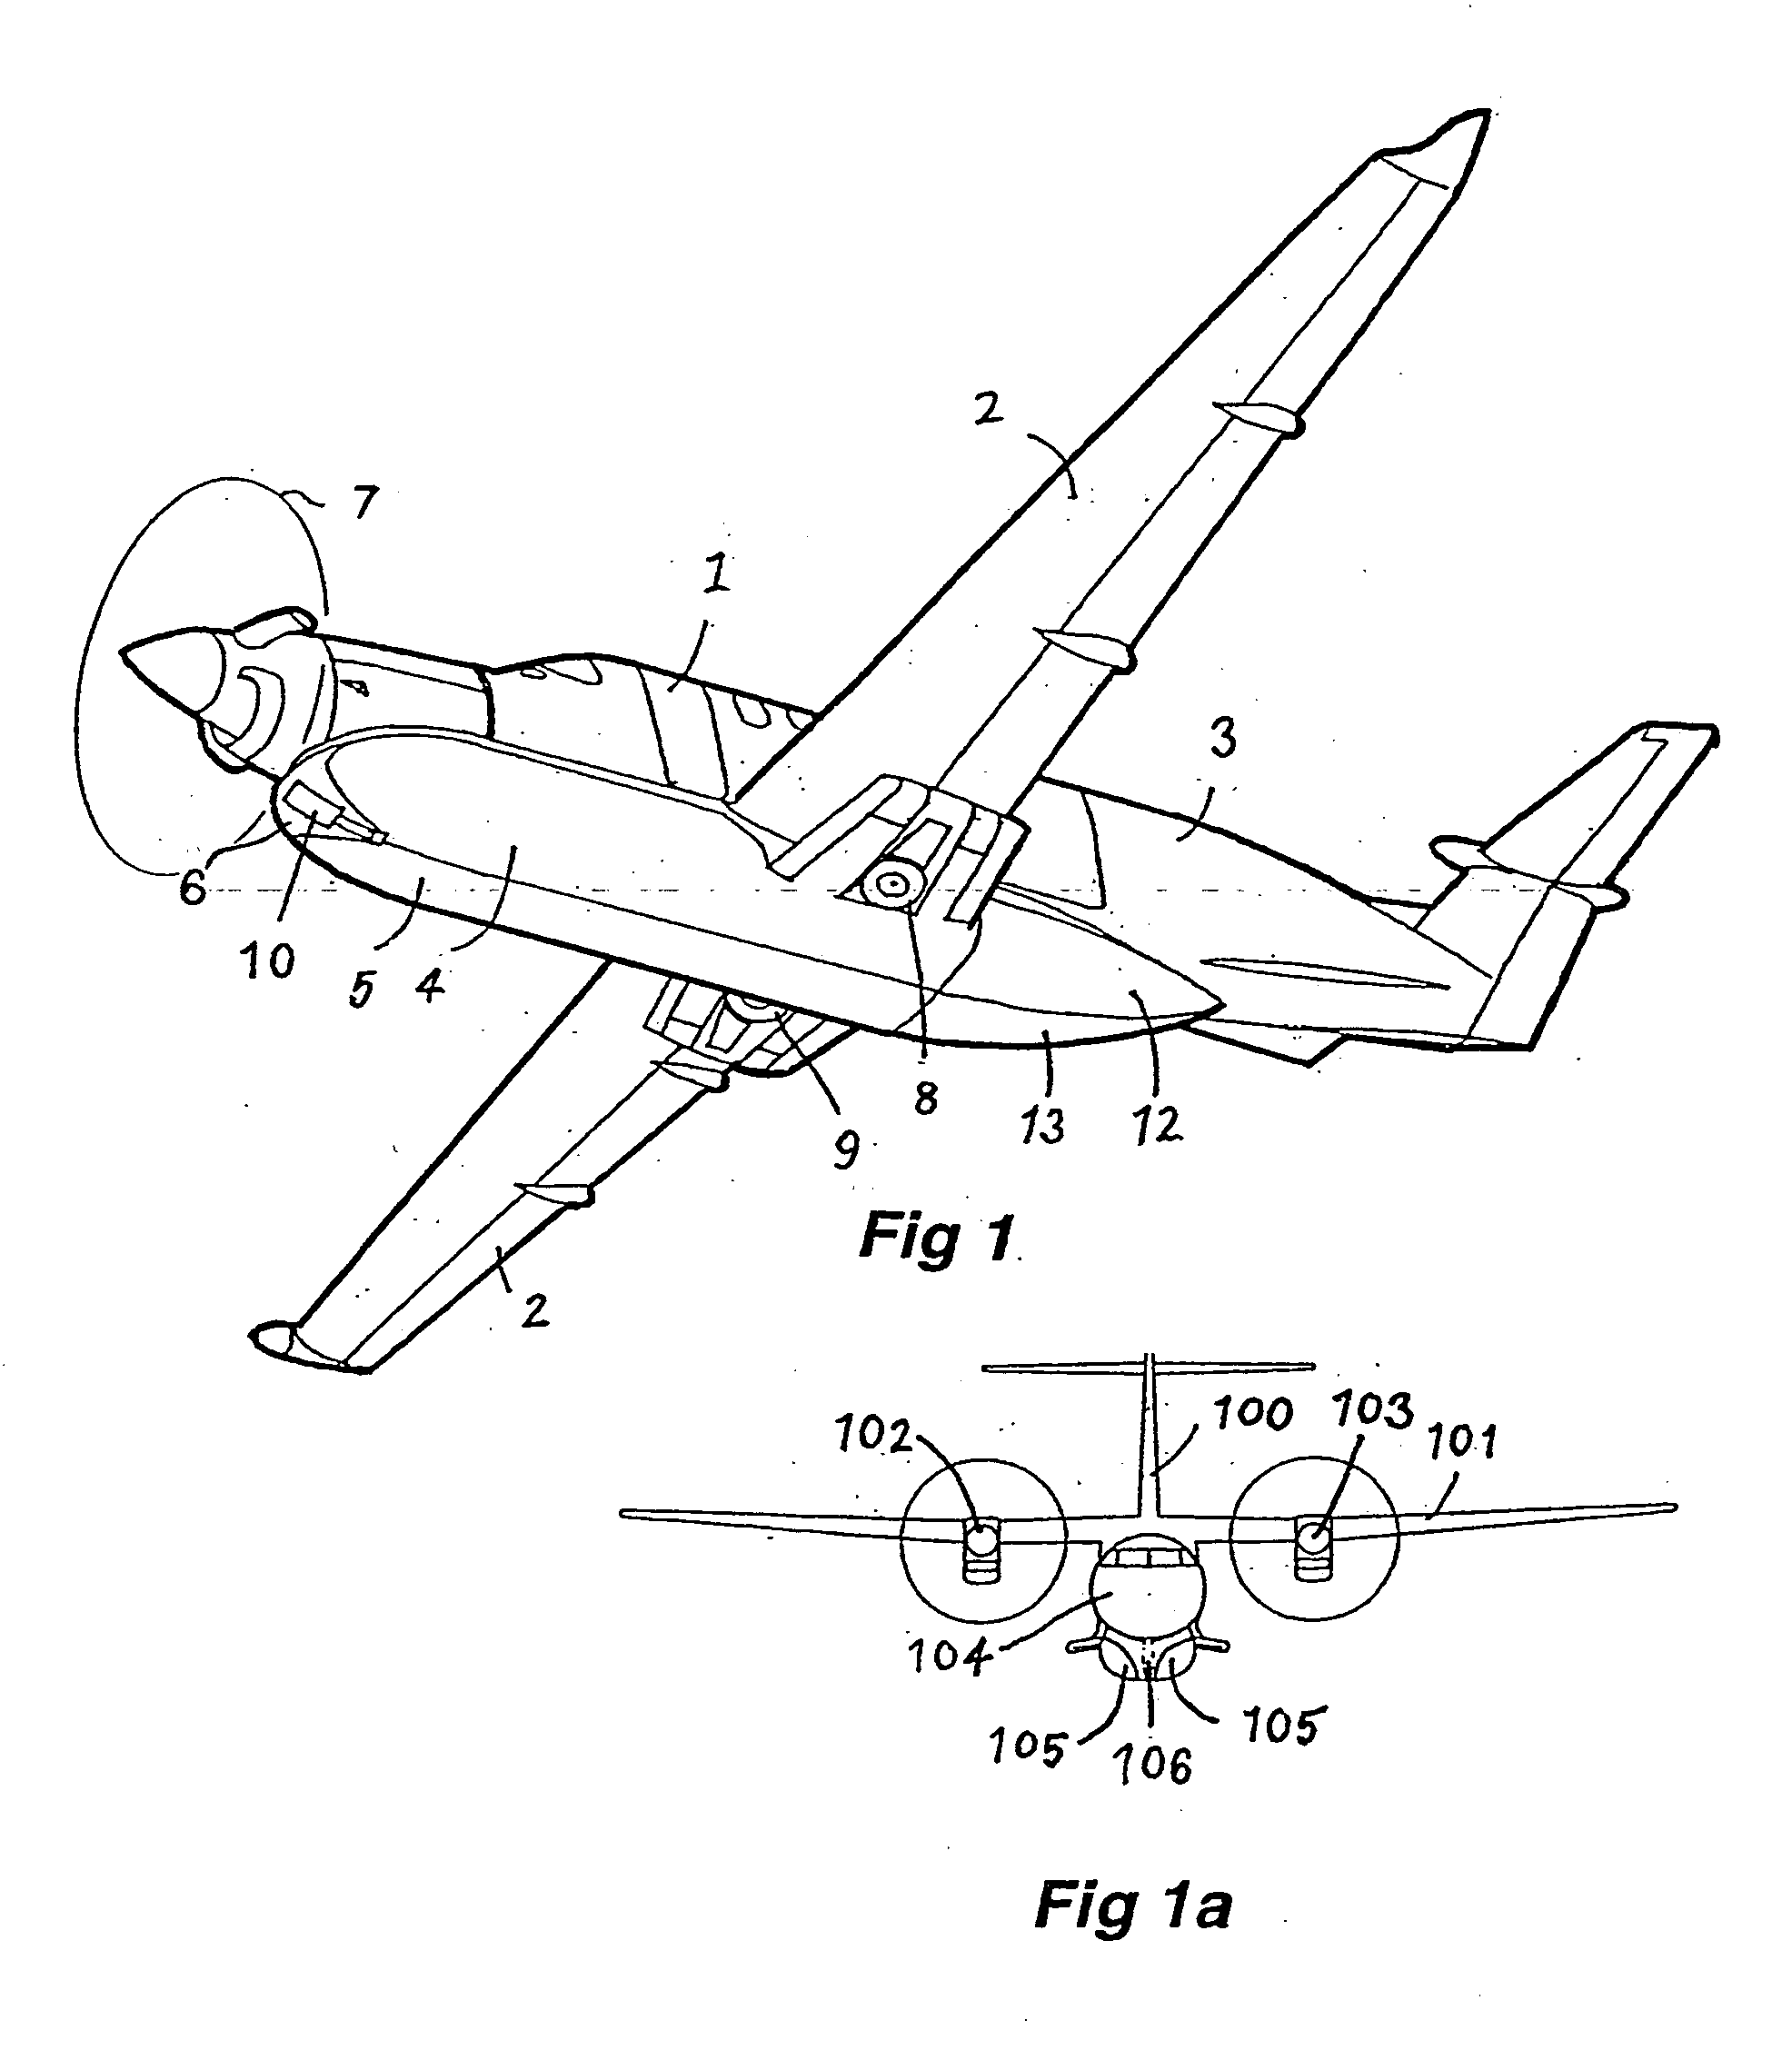 Seaplane with retractable twin floats